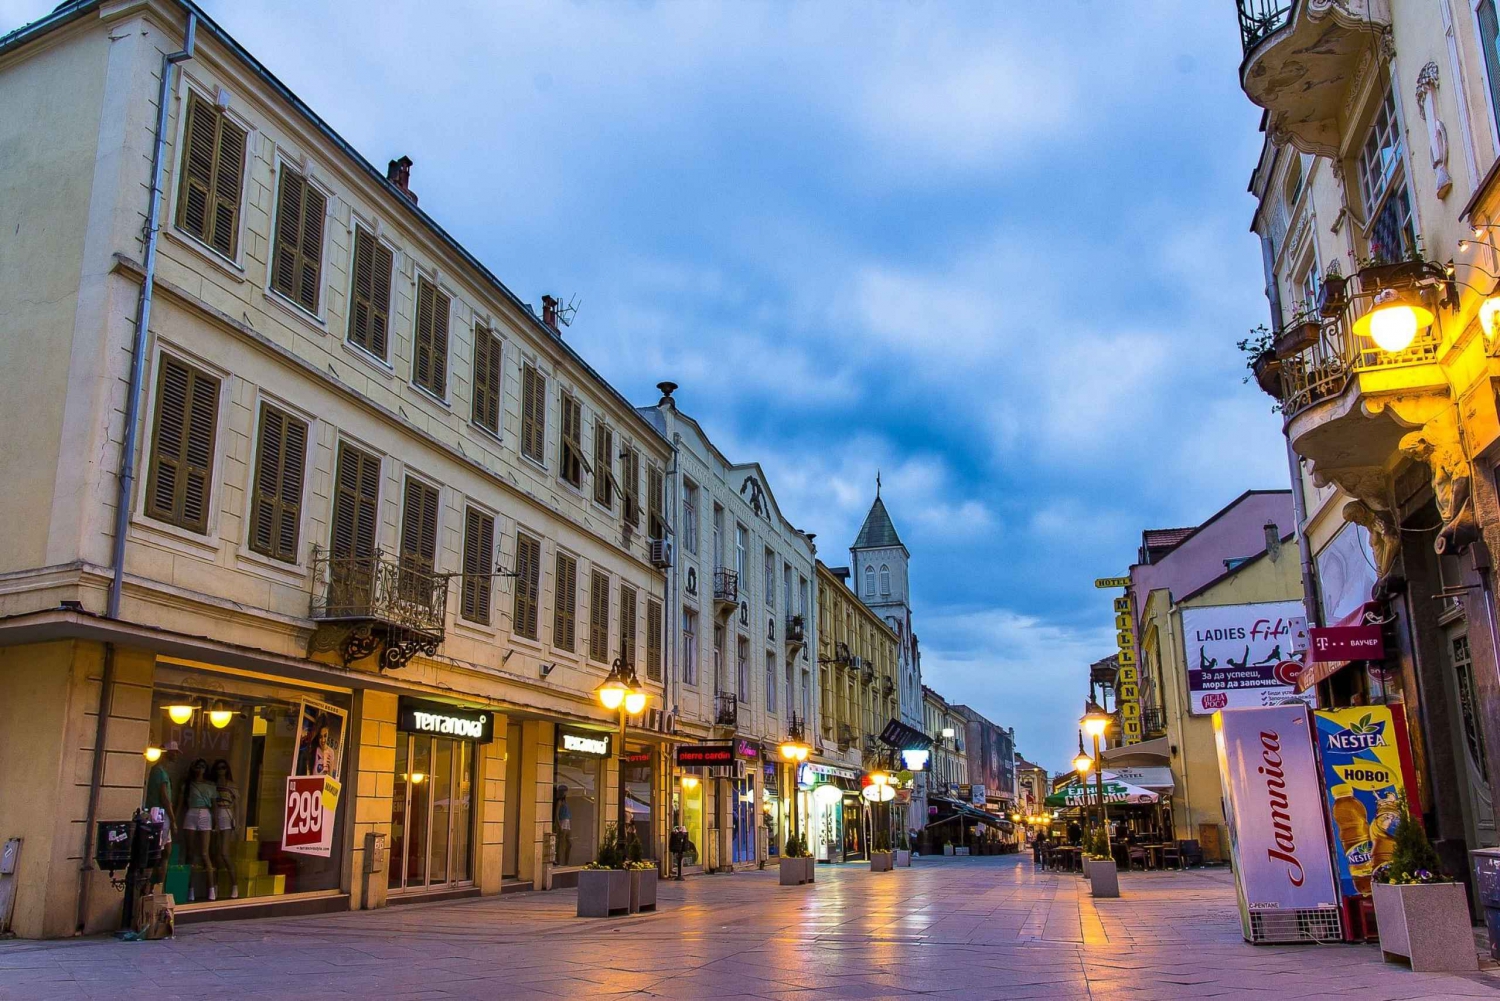 From Skopje: Bitola and Ohrid Day Tour